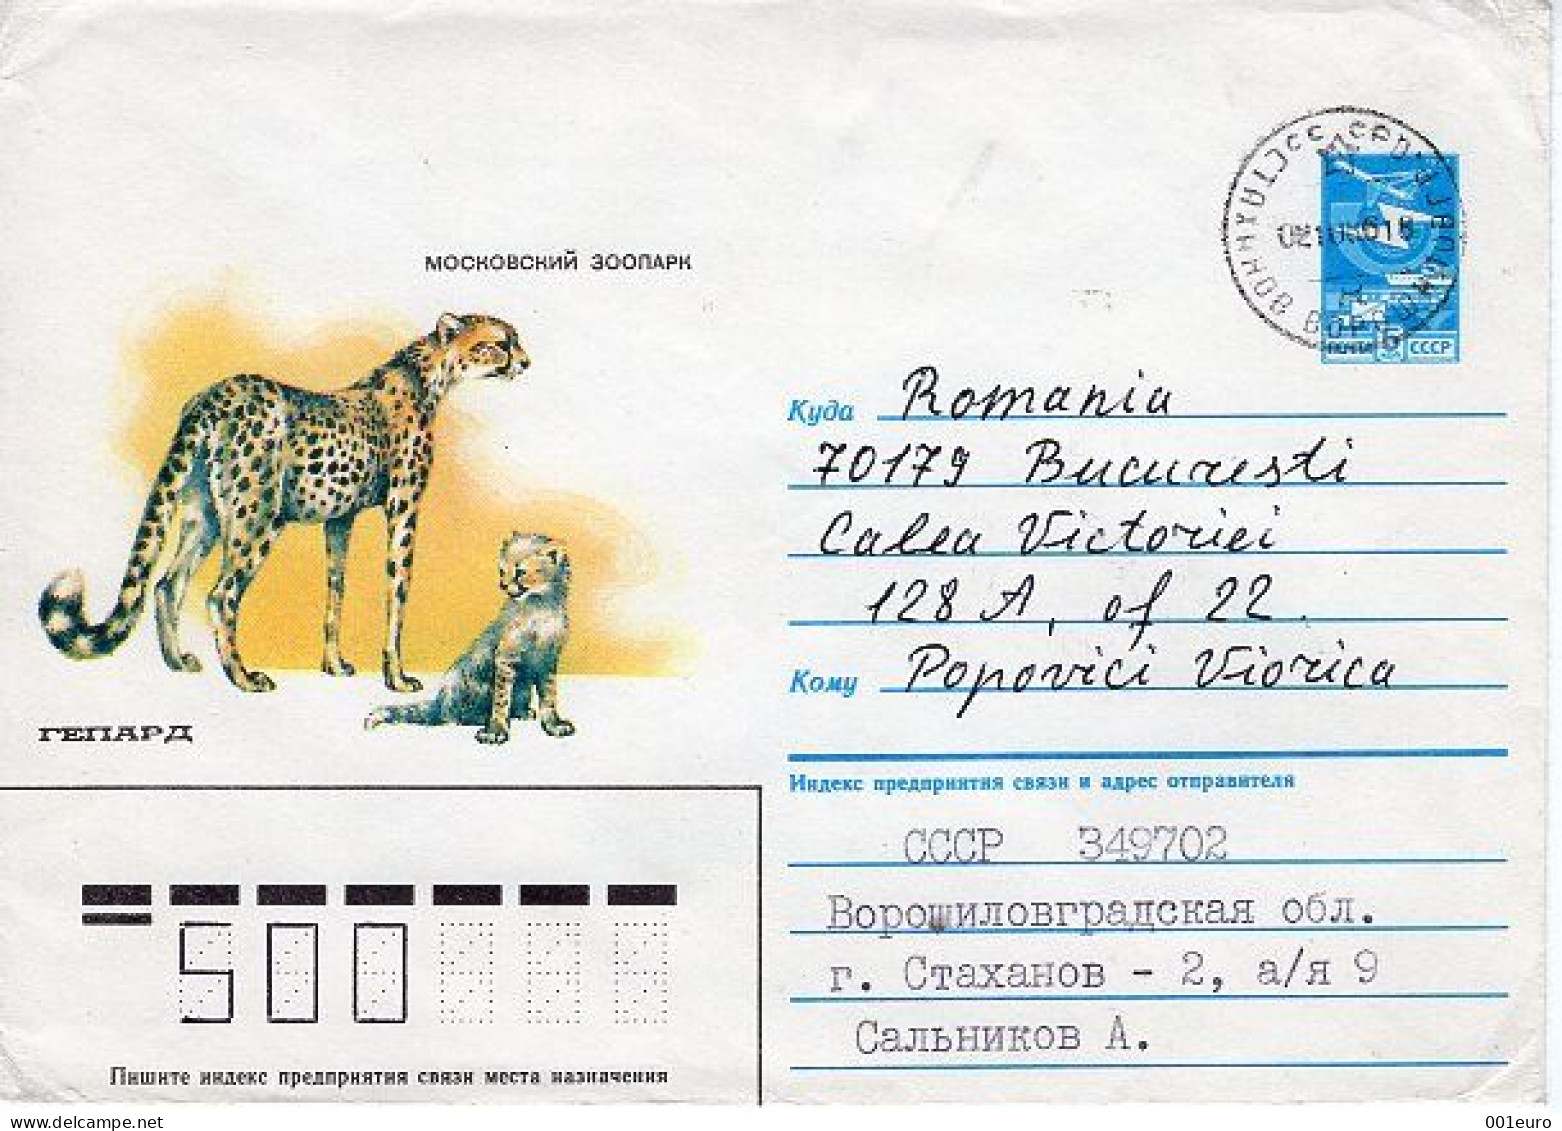 RUSSIA [USSR]: 1992 CHETAH - MOSCOW ZOO PARK Used Postal Stationery Cover - Registered Shipping! - Enteros Postales